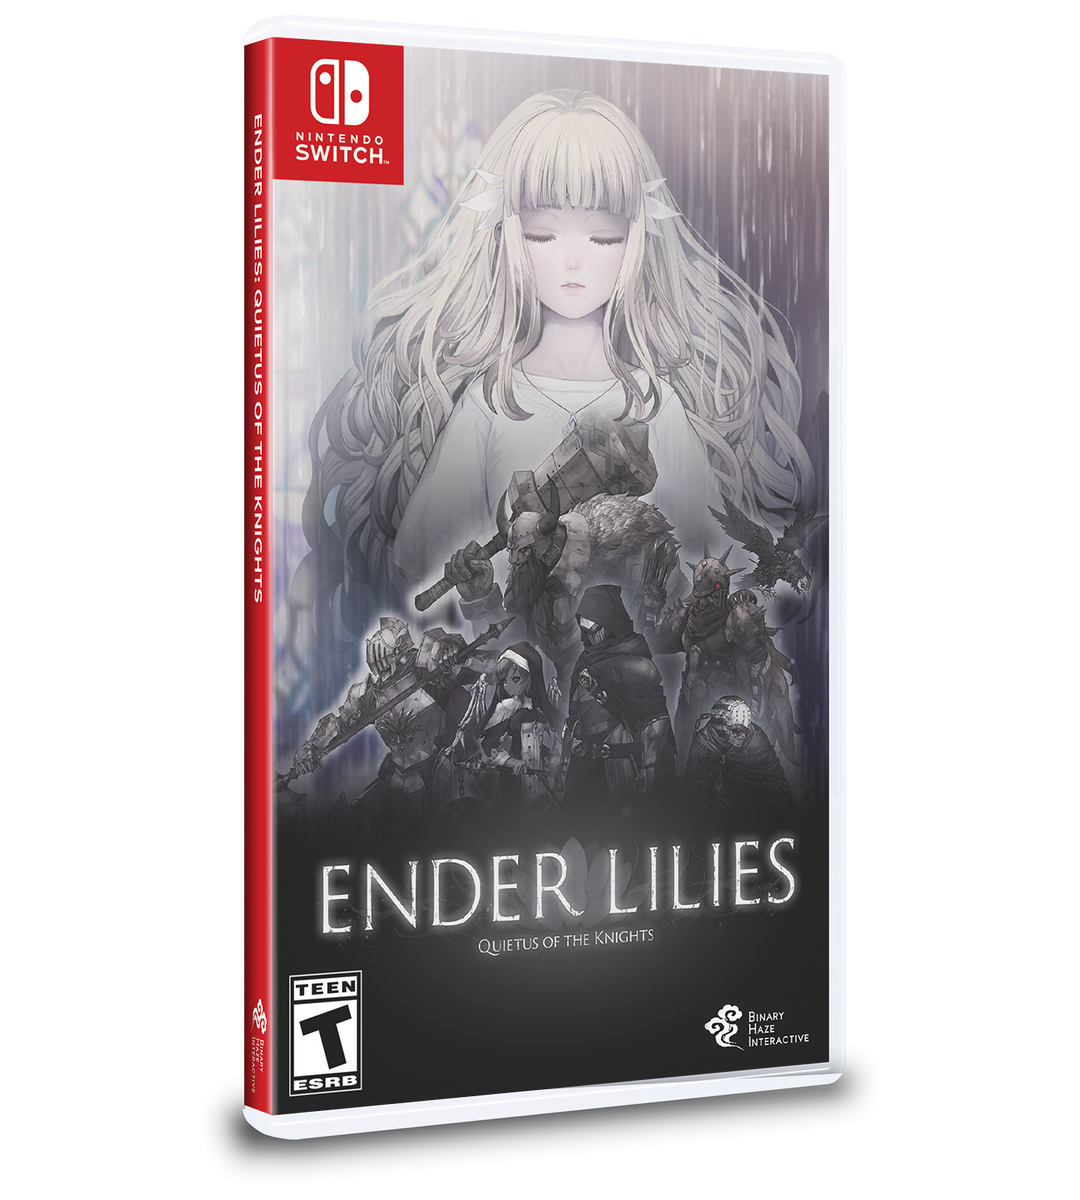 Switch Limited ENDER LILIES Quietus of the Knights Art works Book CD From  Japan